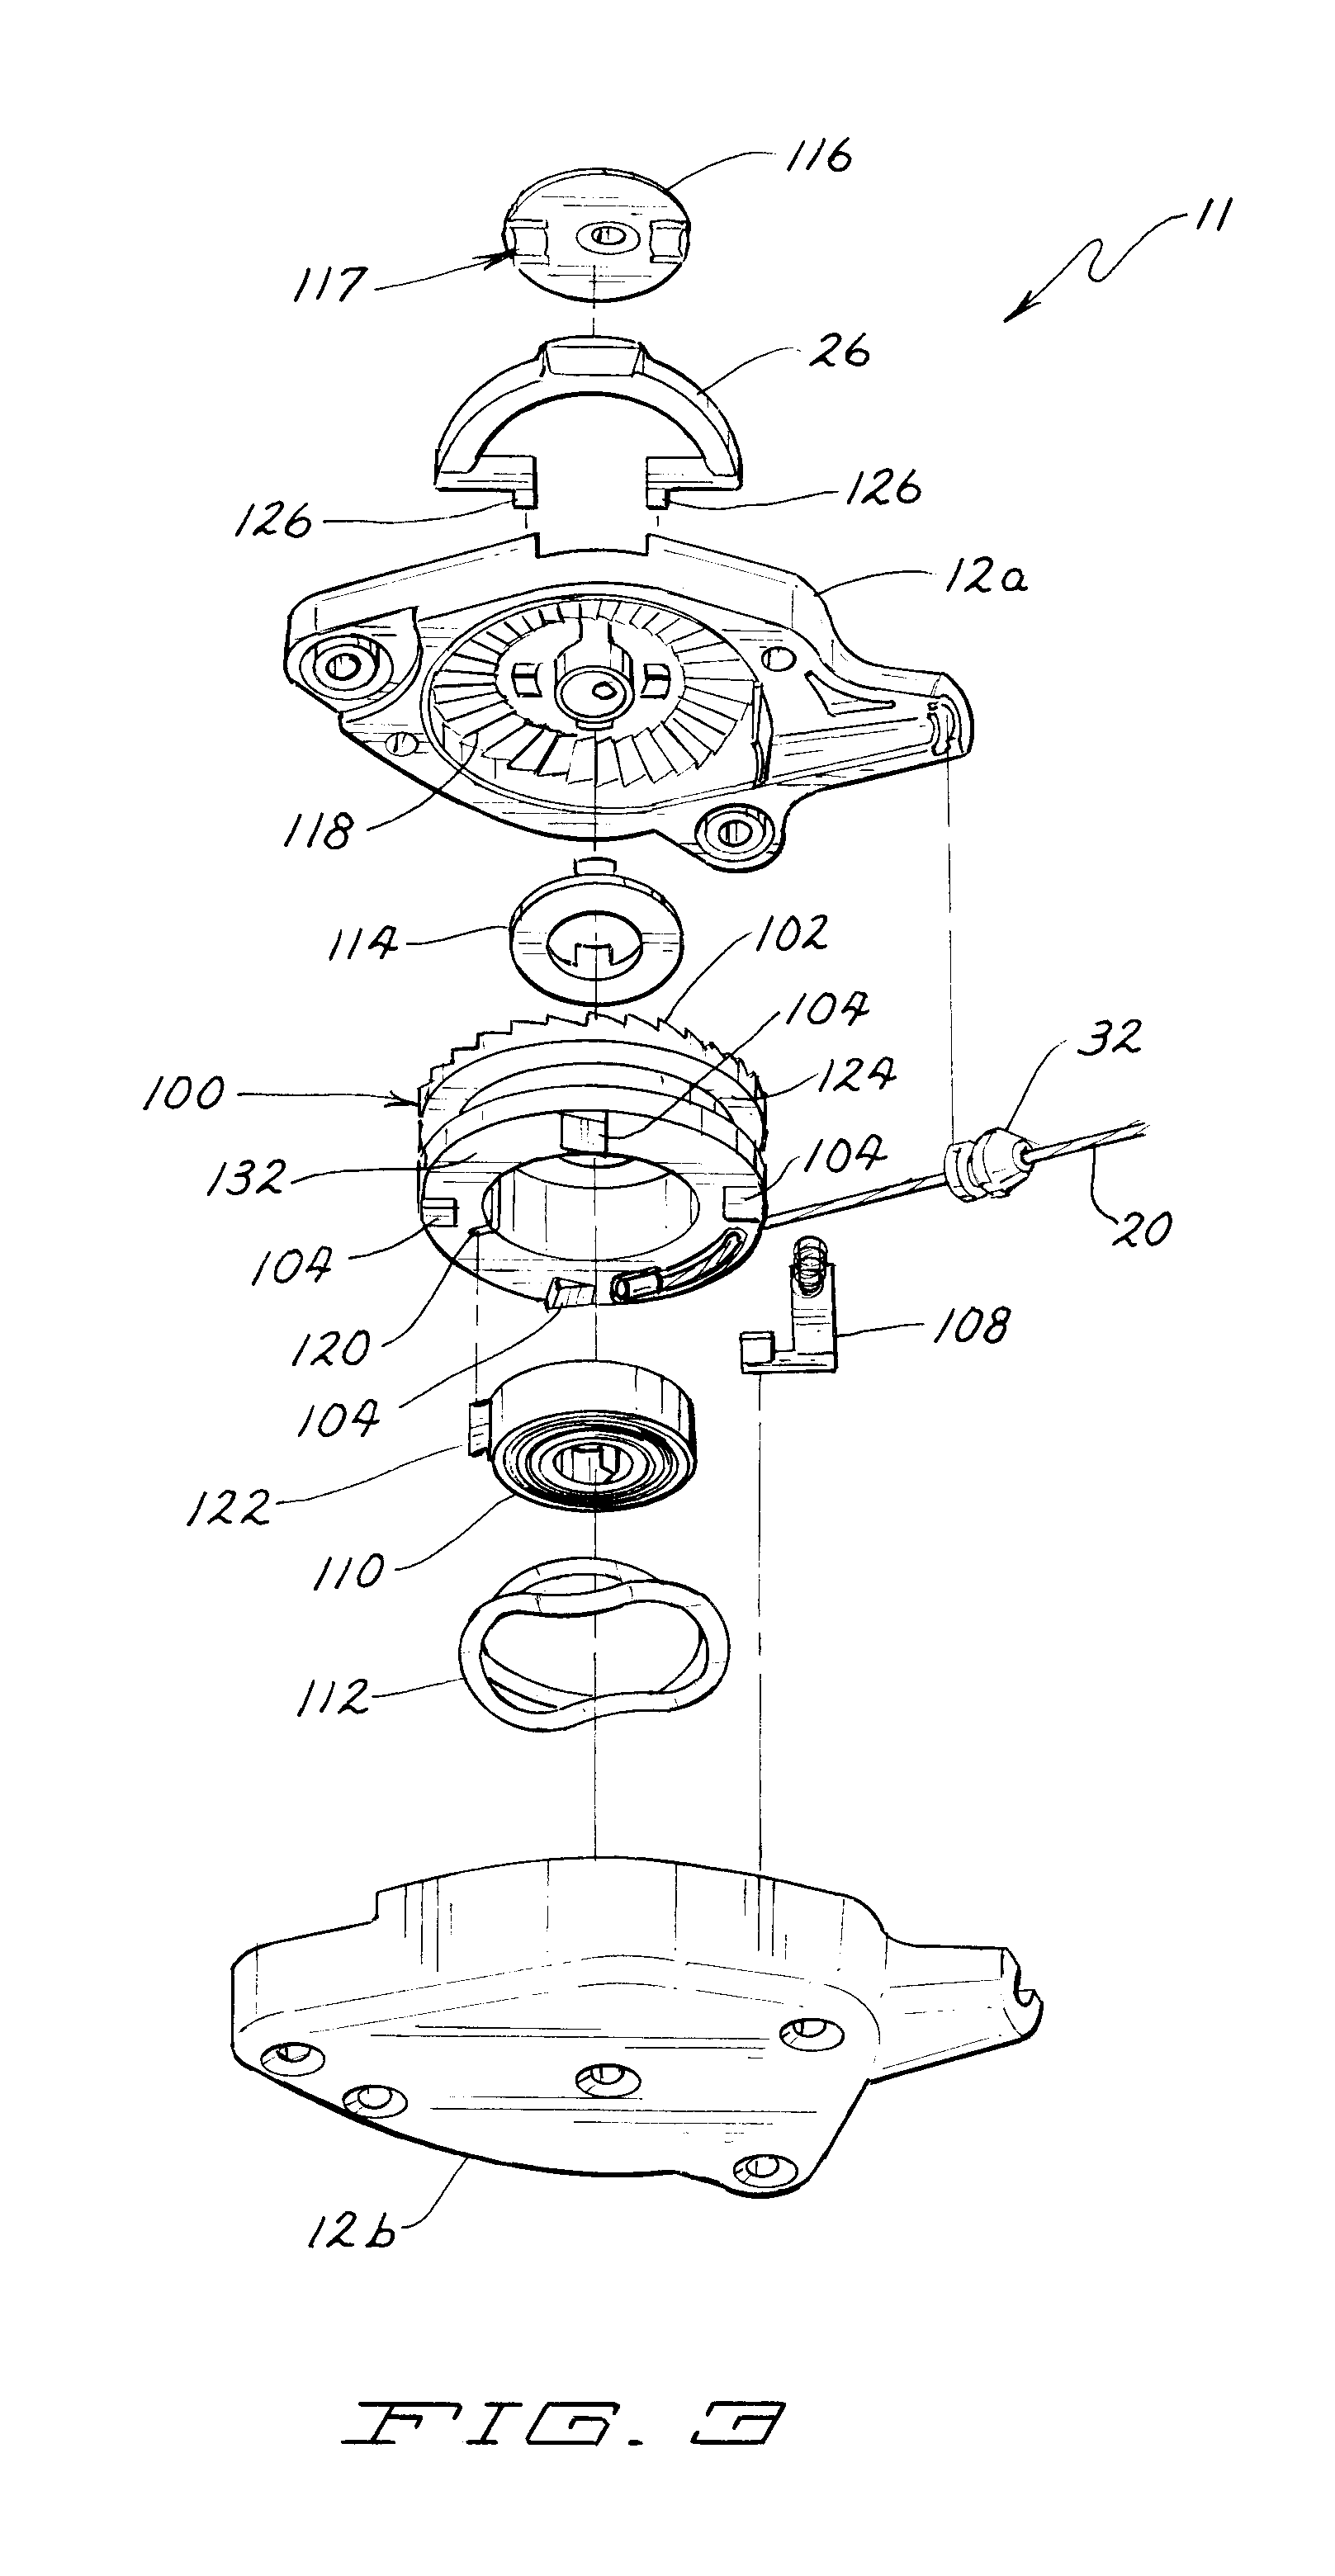 Self-tightening traction assembly having tensioning device